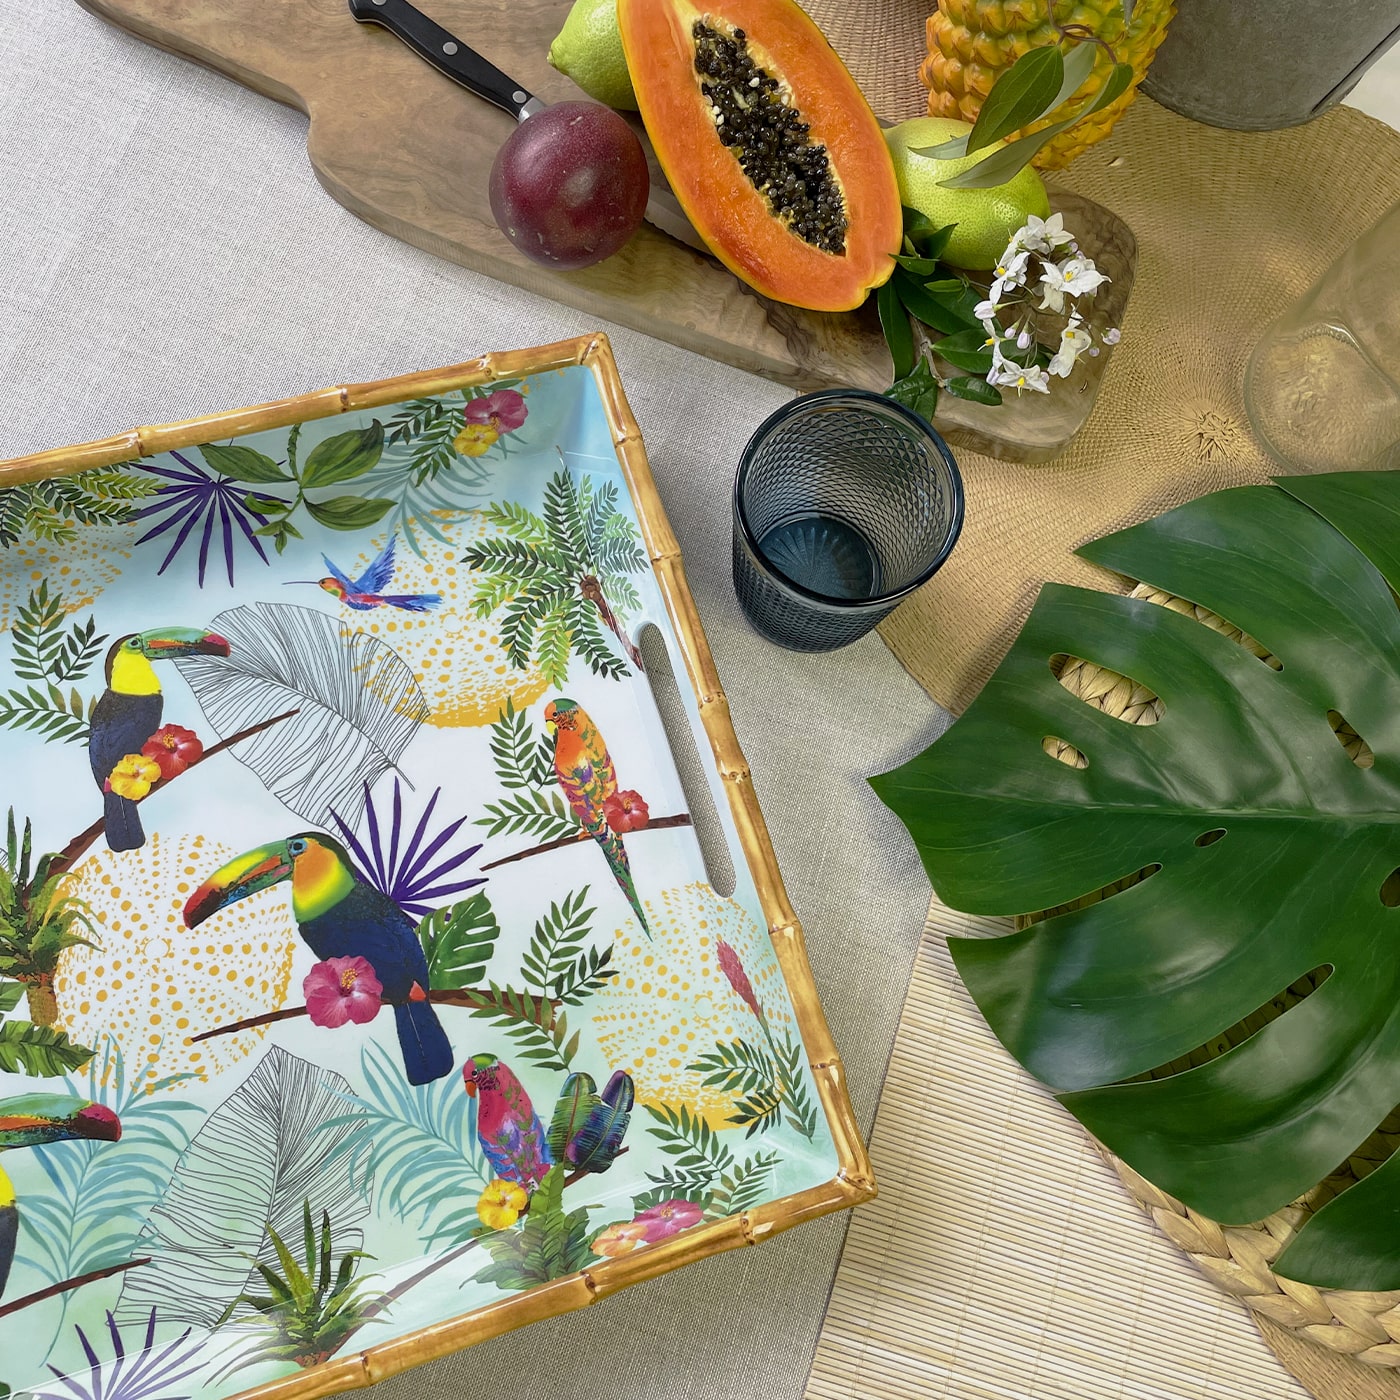 Large melamine tray with handles - toucan design - 50 x 36 x 5 cm